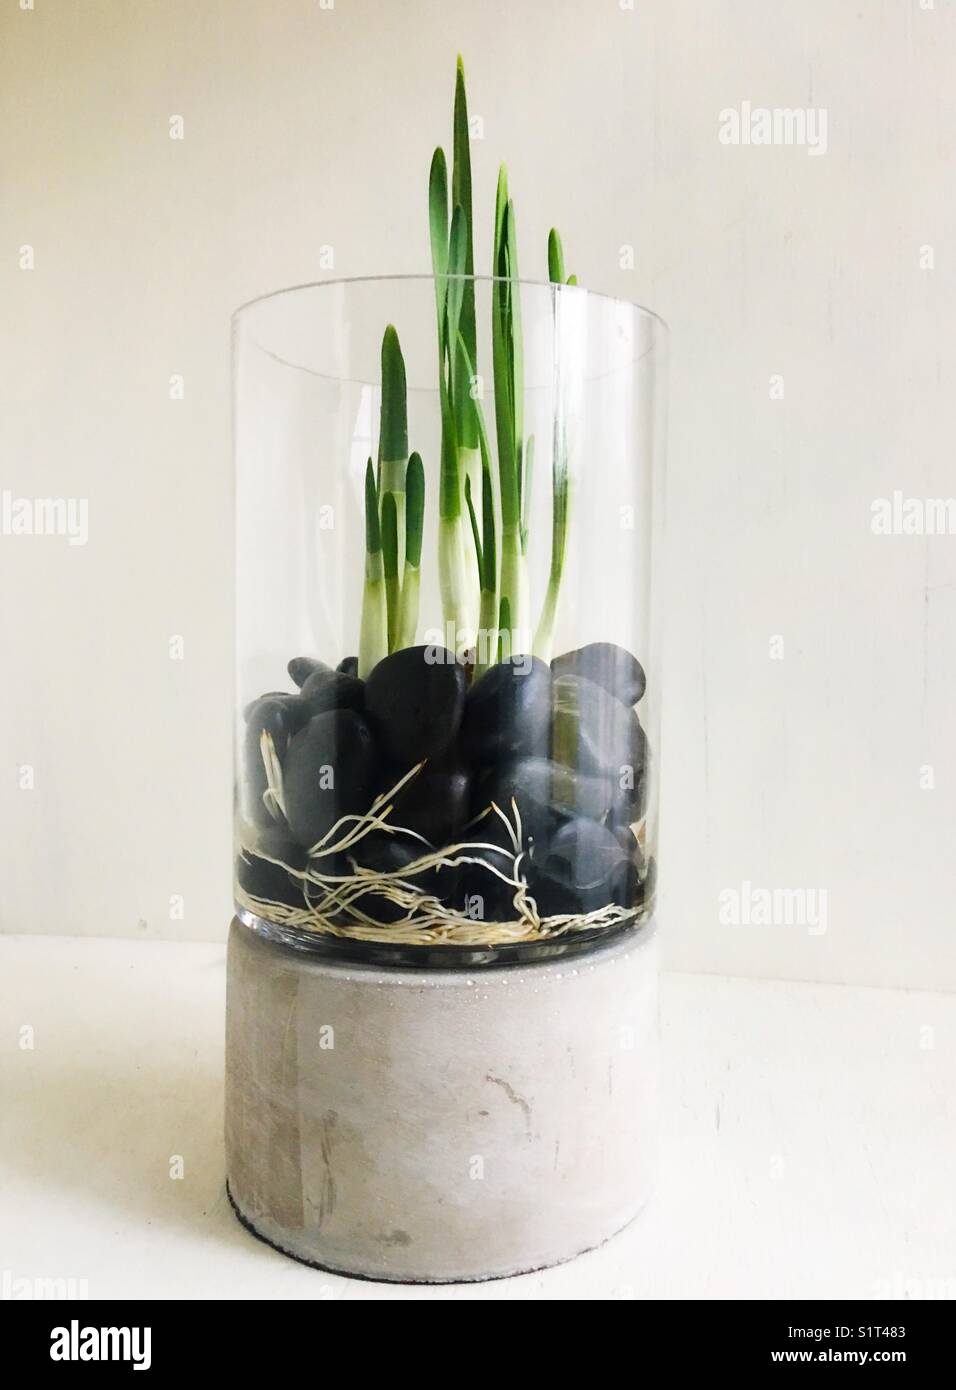 Paperwhites plant bulbs growing in a clear glass container. Stock Photo